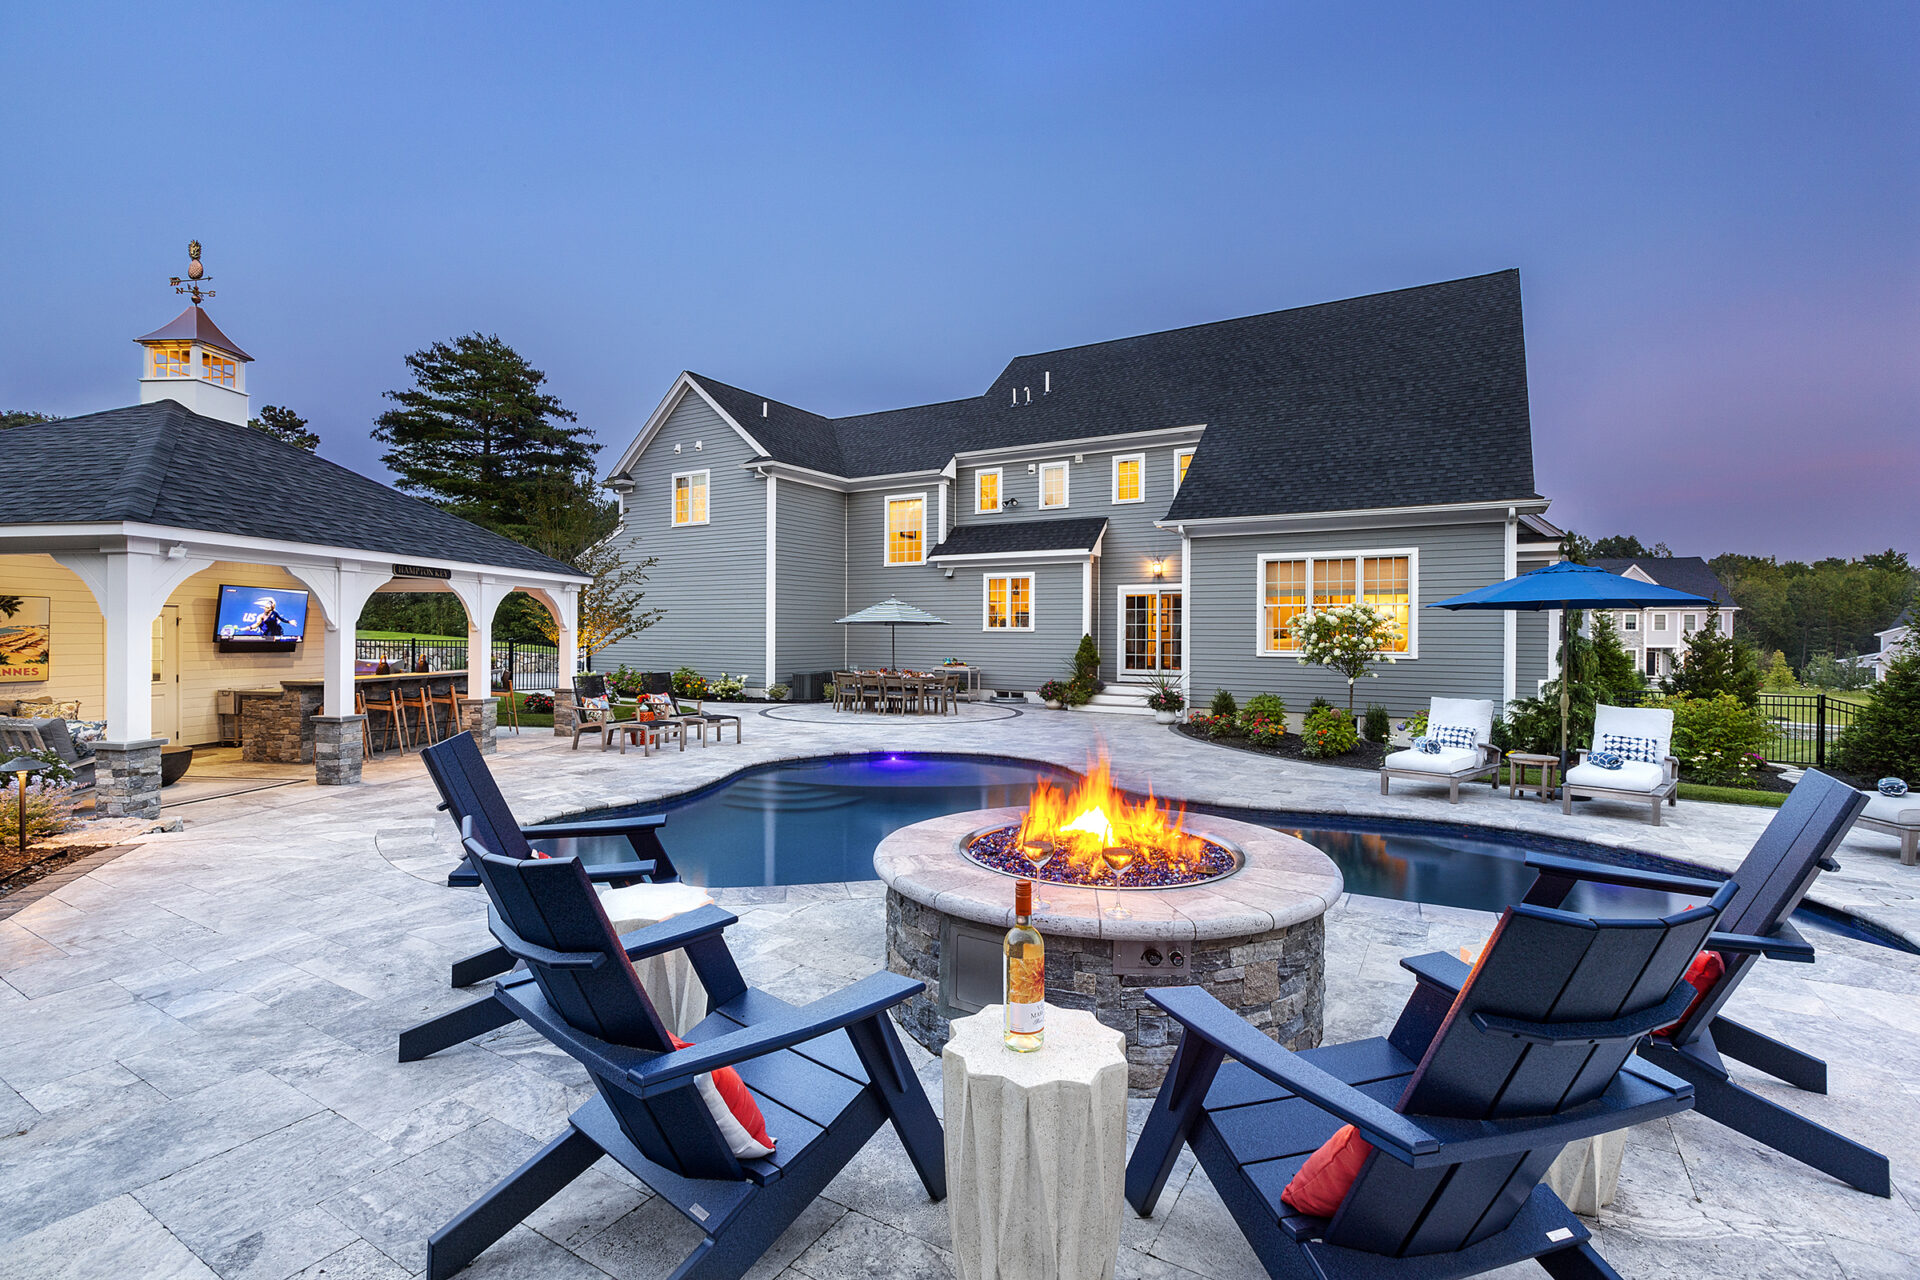 Poolside fire pit overlooking backyard hardscaping. Dex by Terra Residential Landscape Design & Build Project in Norfolk, MA